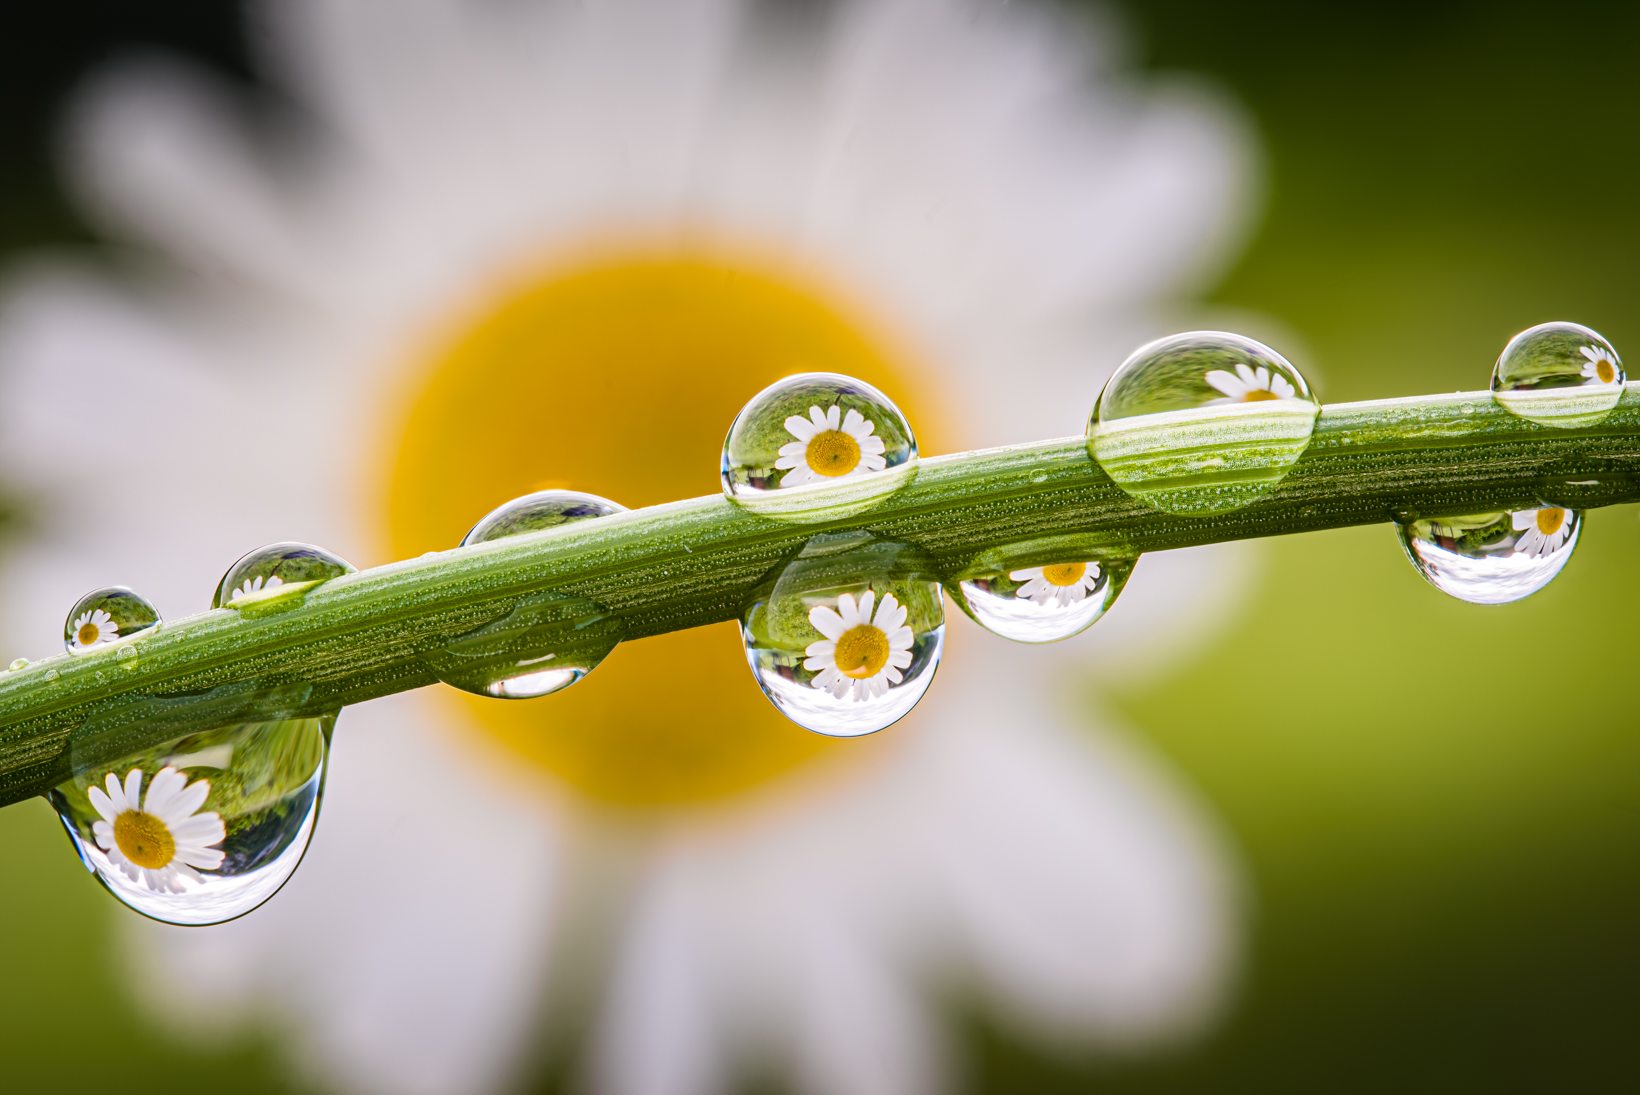 Daisy reflected in the drops of water...